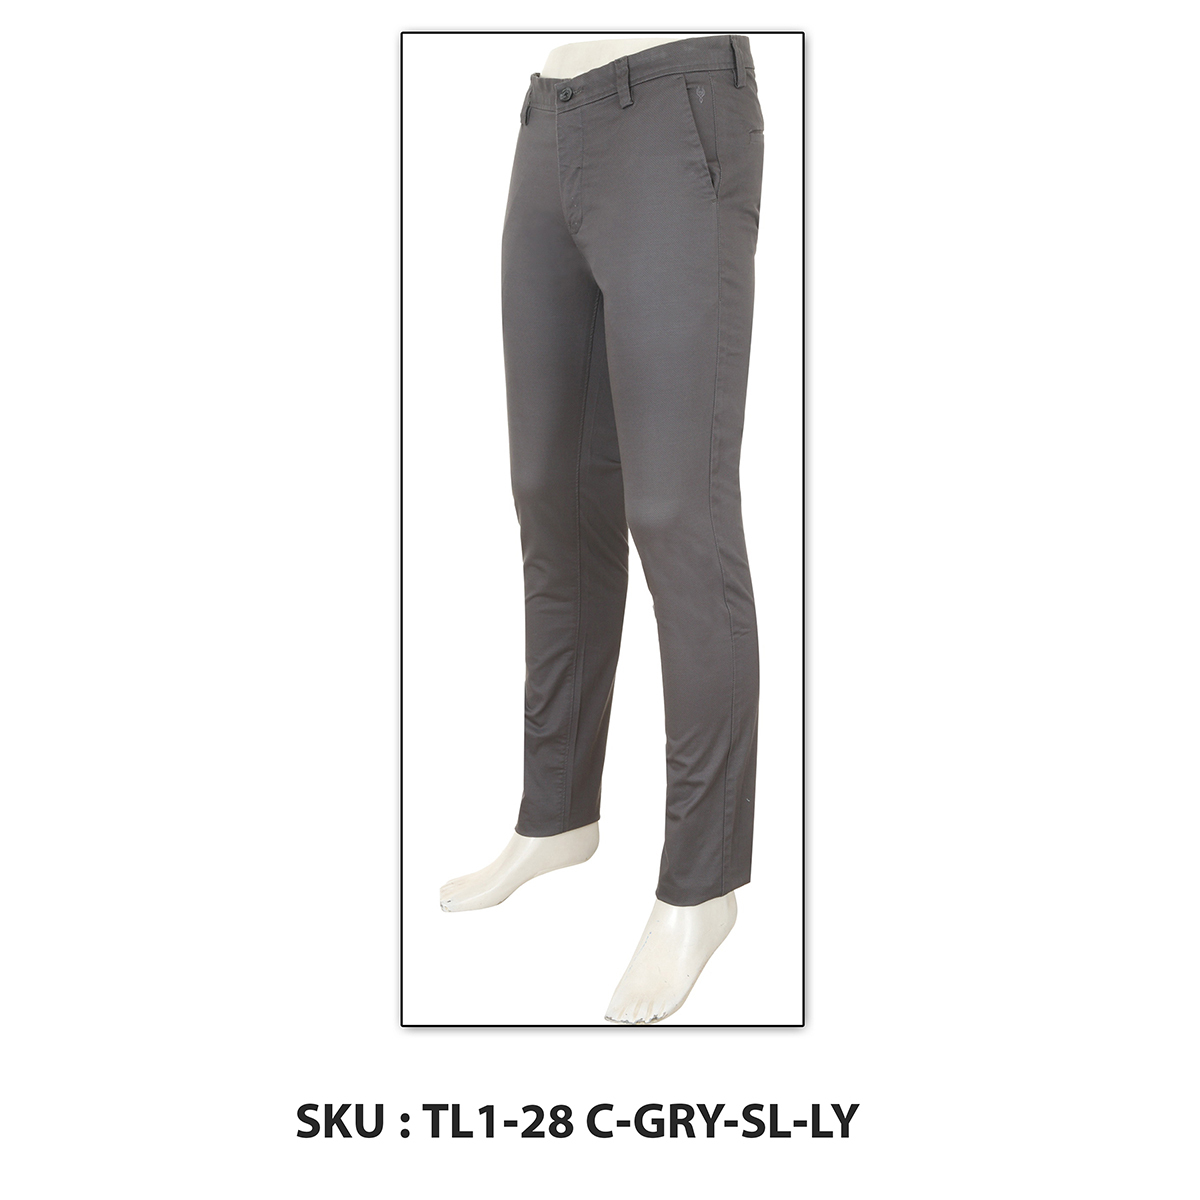 Classic Polo Mens Trousers Tl1-28 C-Gry-Sl-Ly Grey 32